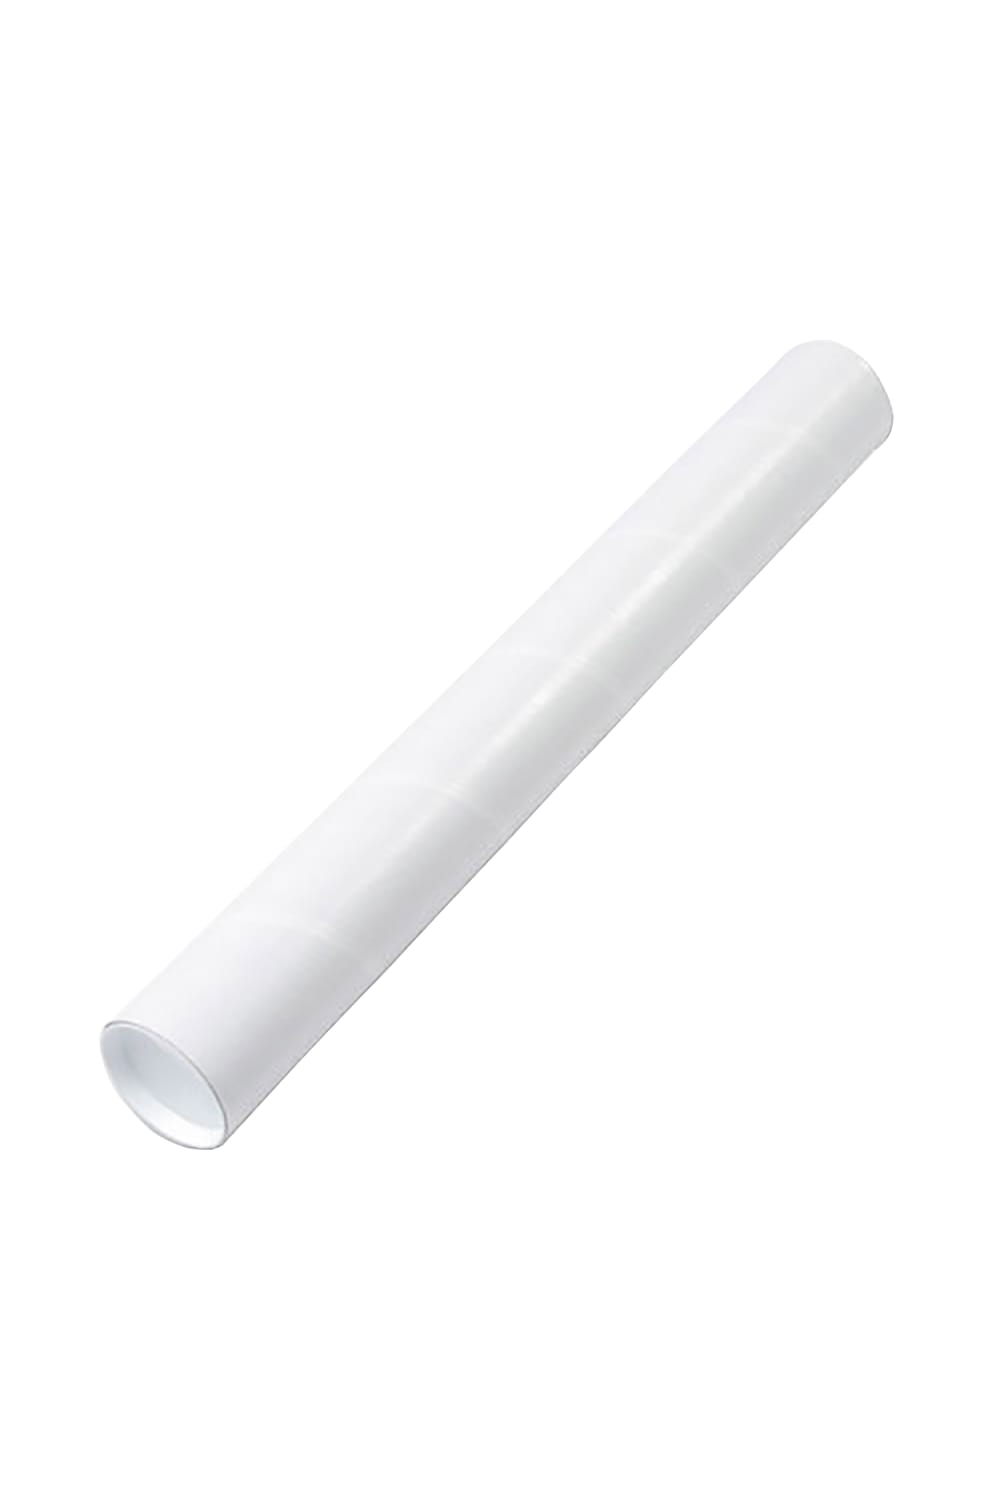 County Stationery Poster/Artwork Postal Tubes (Pack Of 10) (White) (Small)